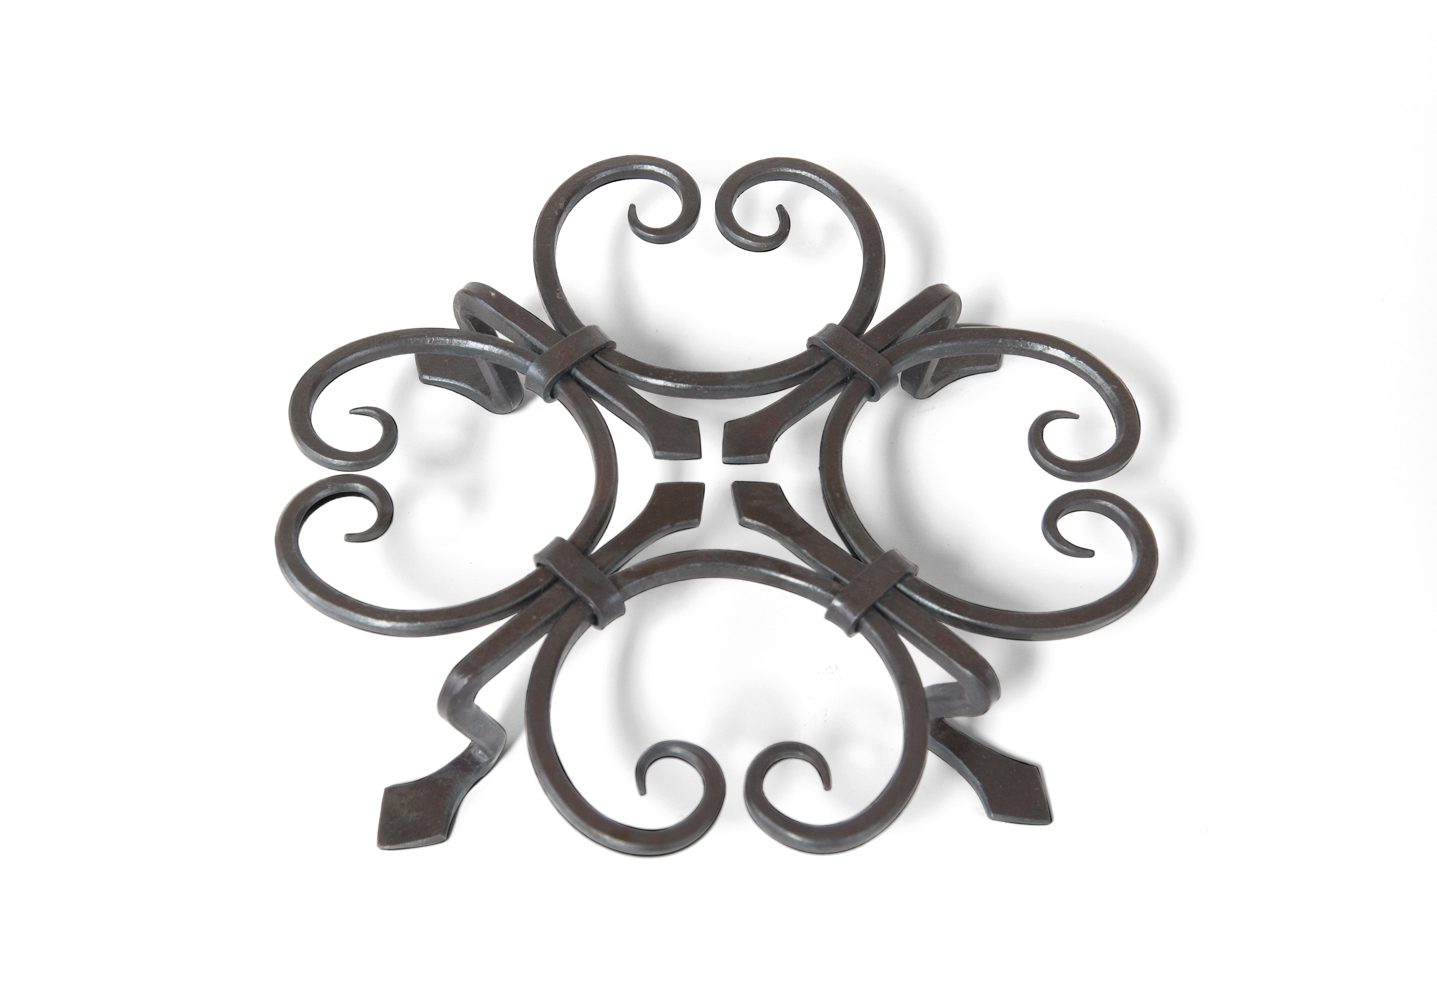 Handmade Metal Trivet: Assorted Kitchenwares and More! Each Blacksmith Made